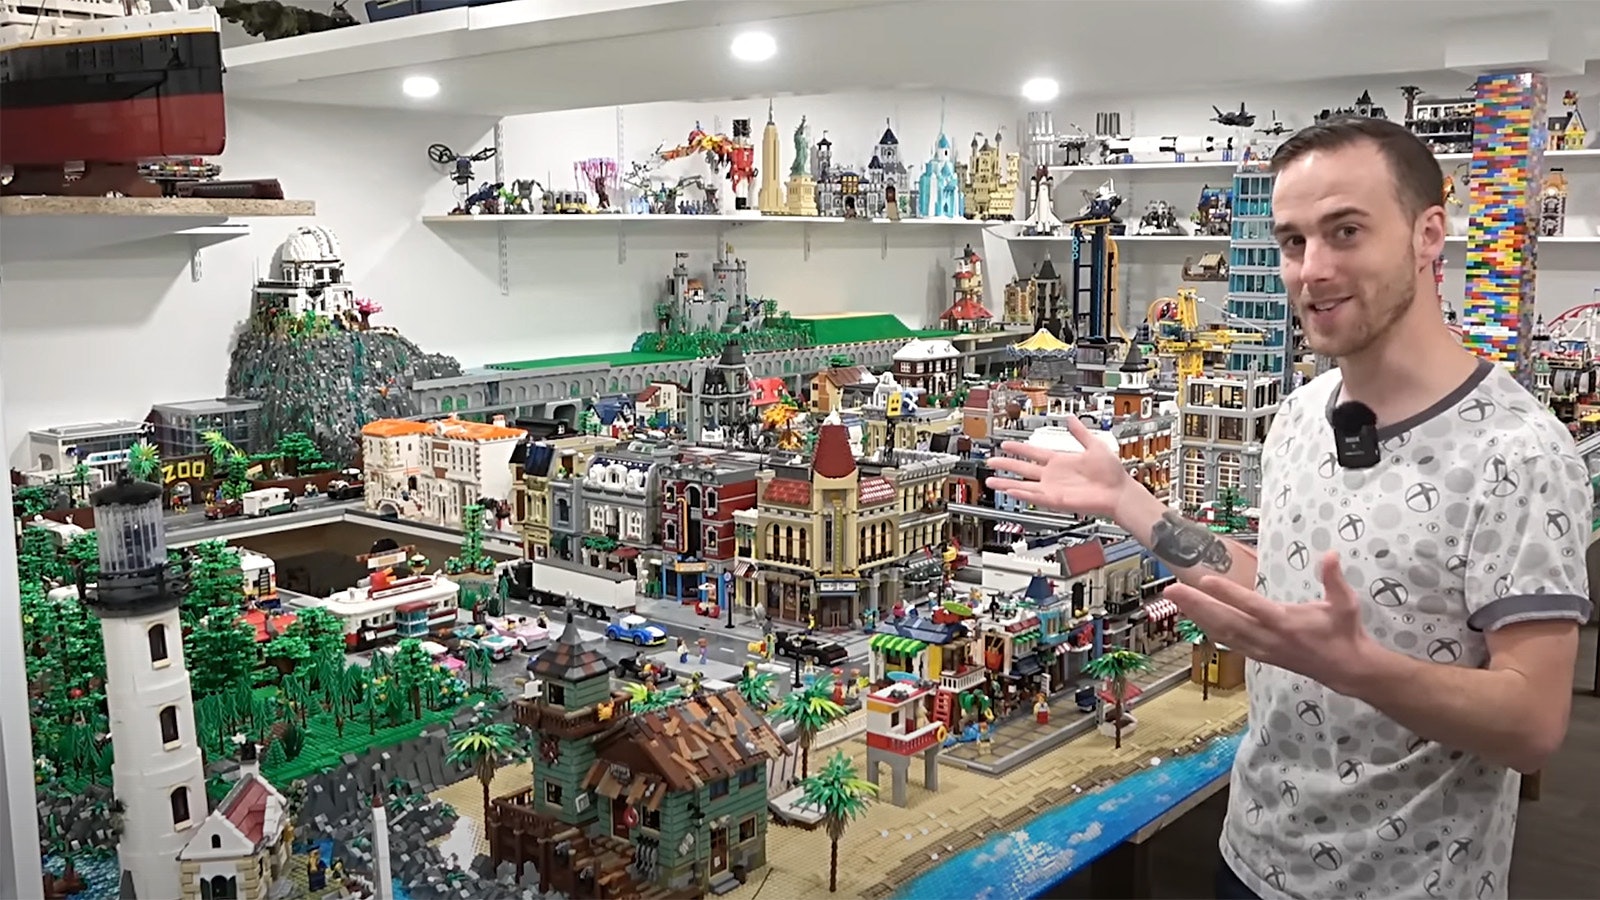 This huge Lego city represents the ultimate in collecting and building with the popular plastic blocks.